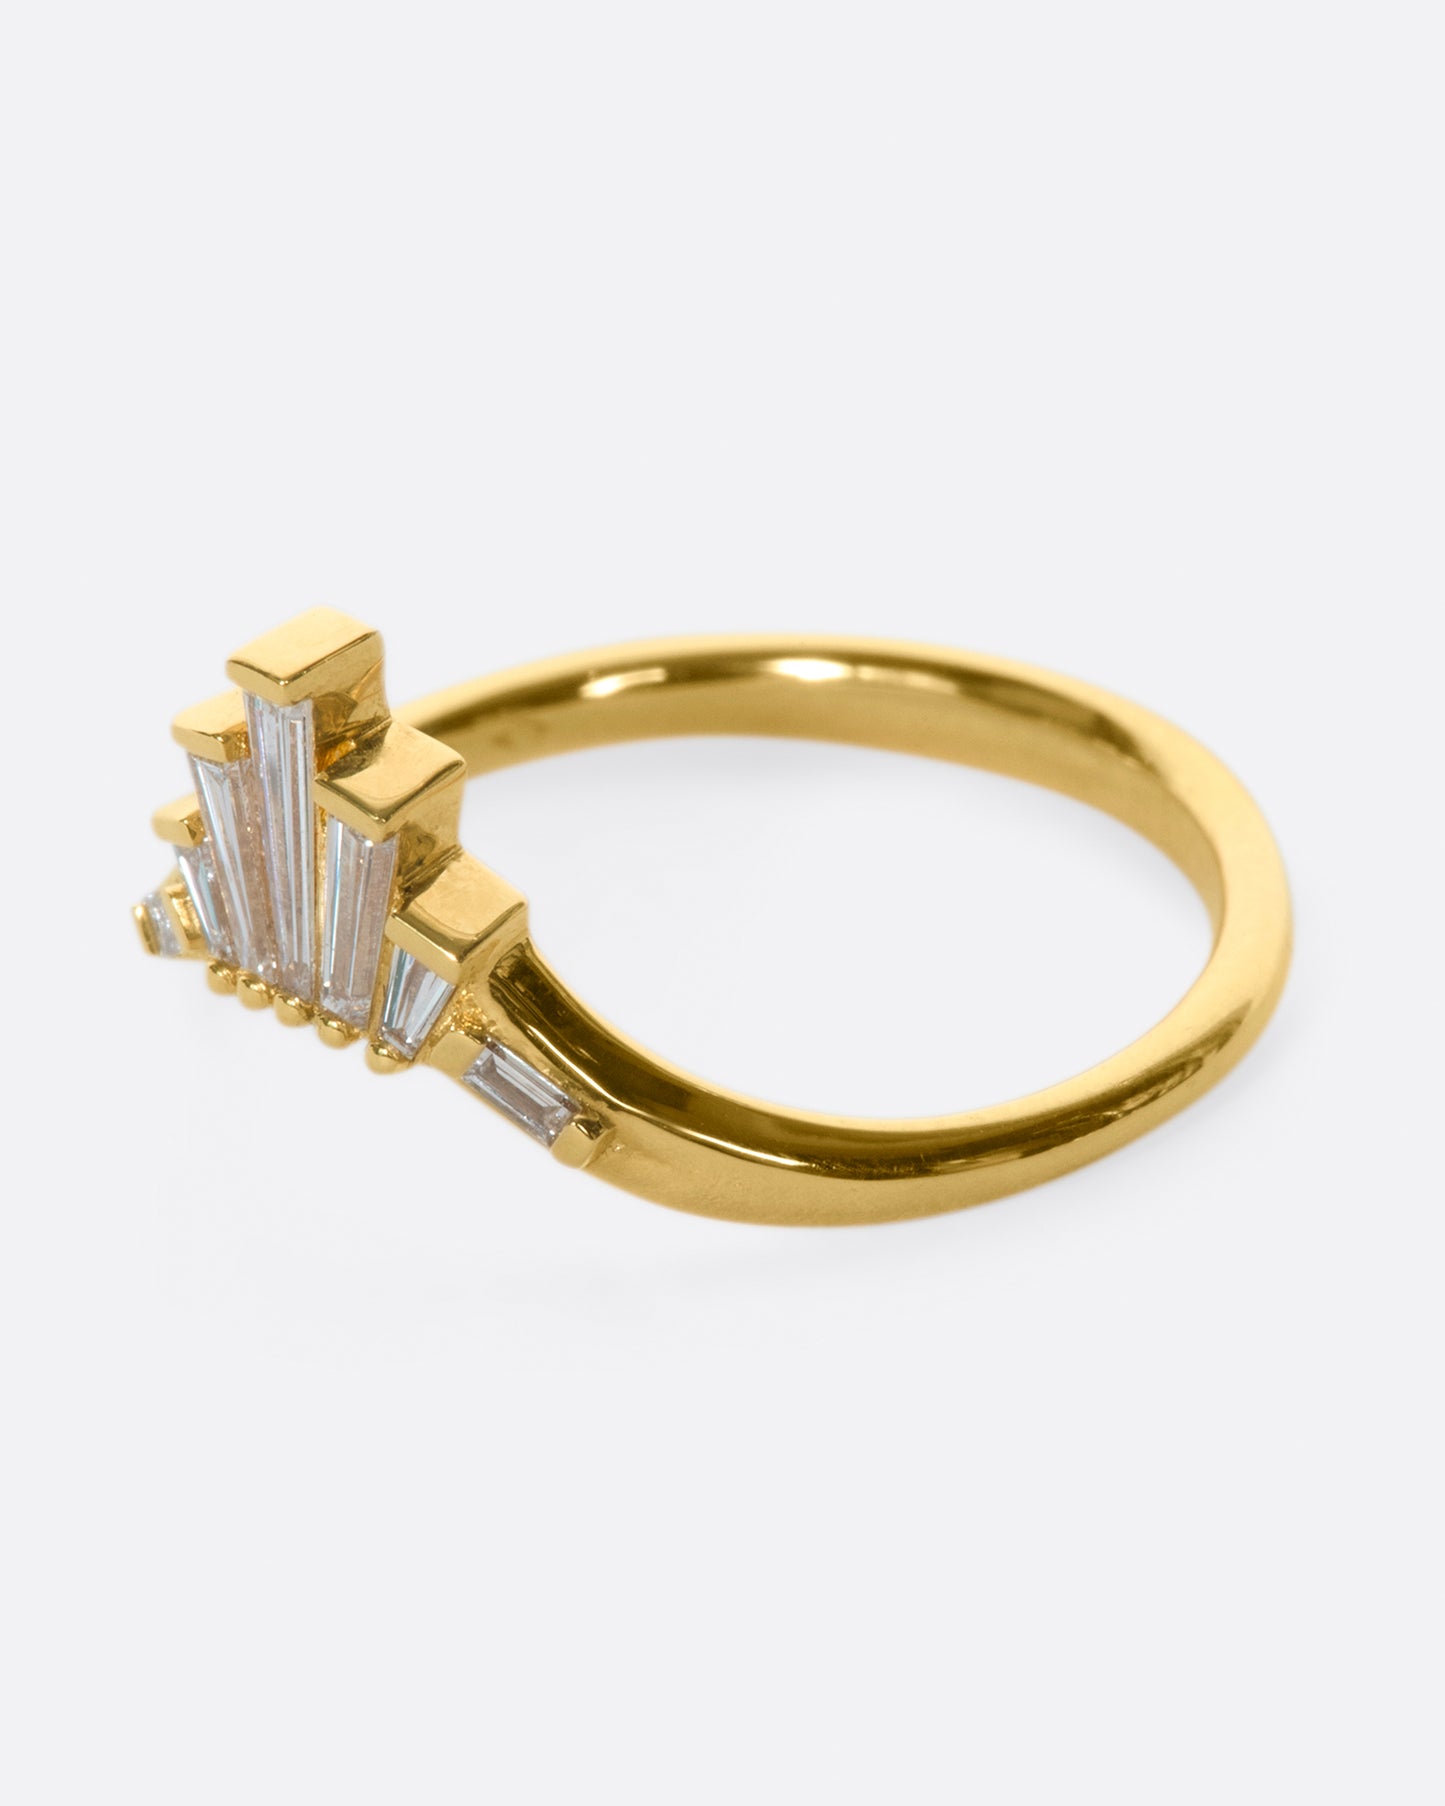 A nesting ring inspired by a twisting cityscape, created with elegant and edgy tapered white diamonds.